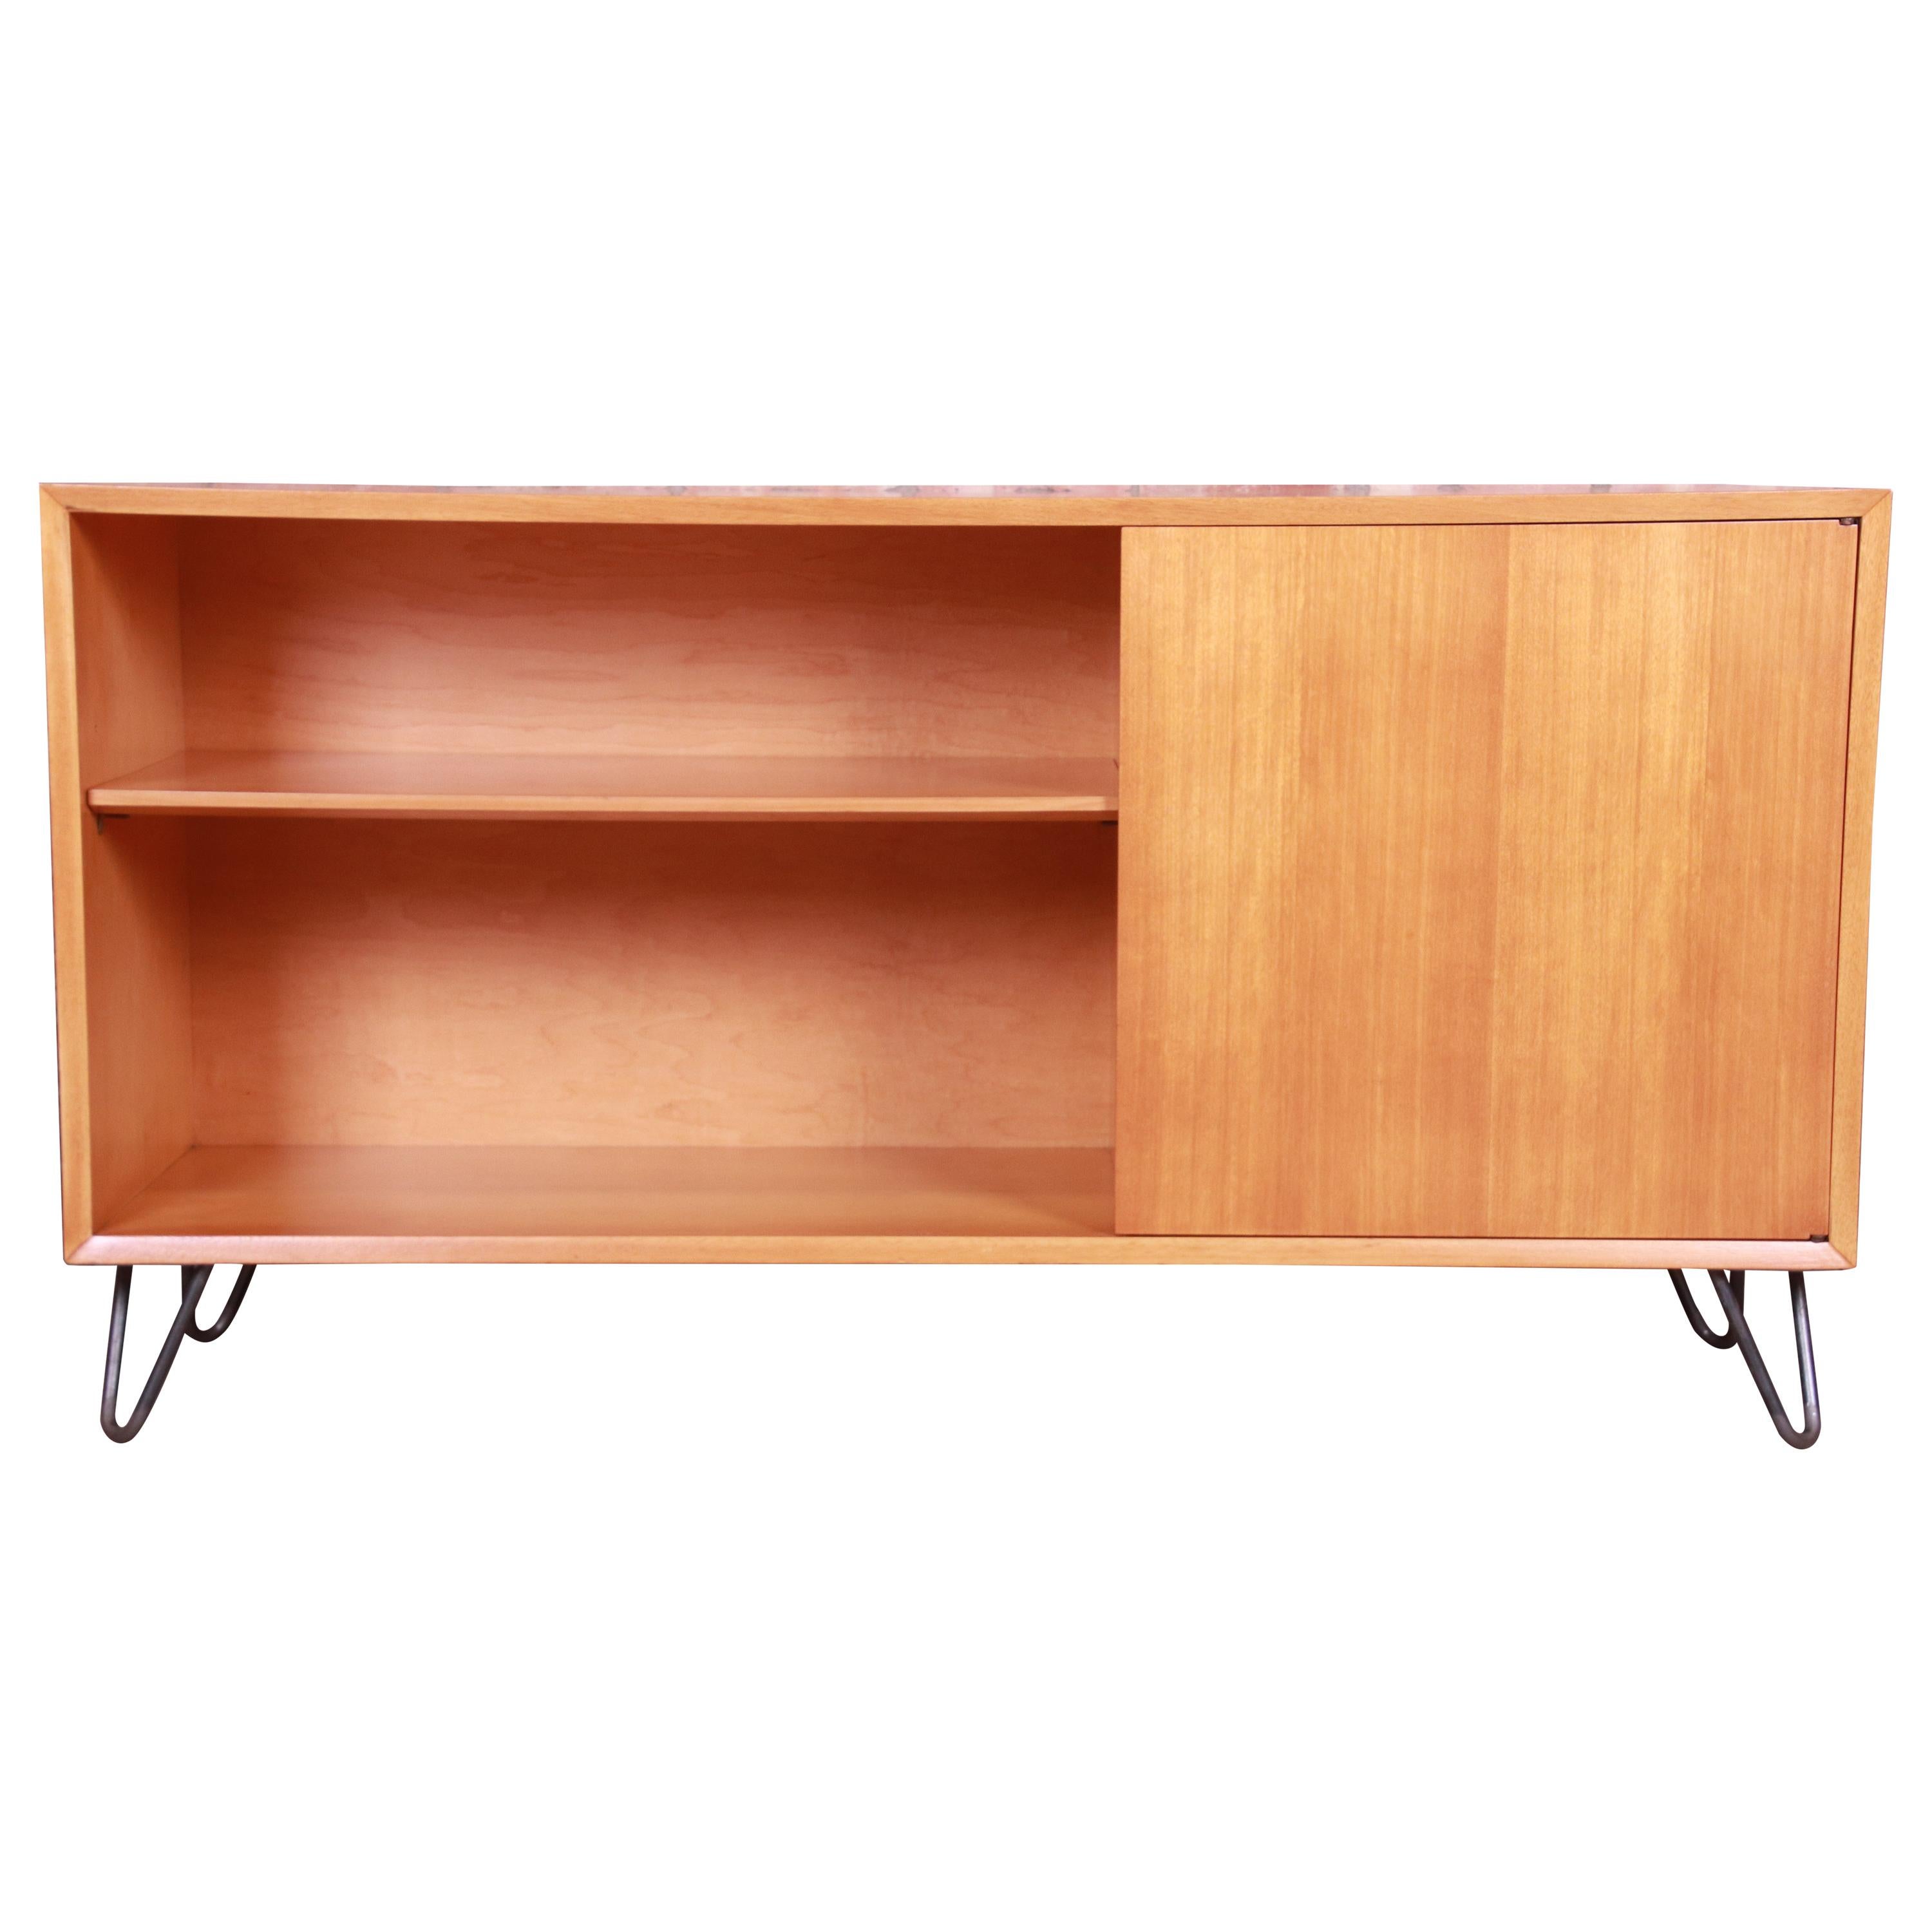 George Nelson for Herman Miller Primavera Wood Credenza or Bookcase, Refinished